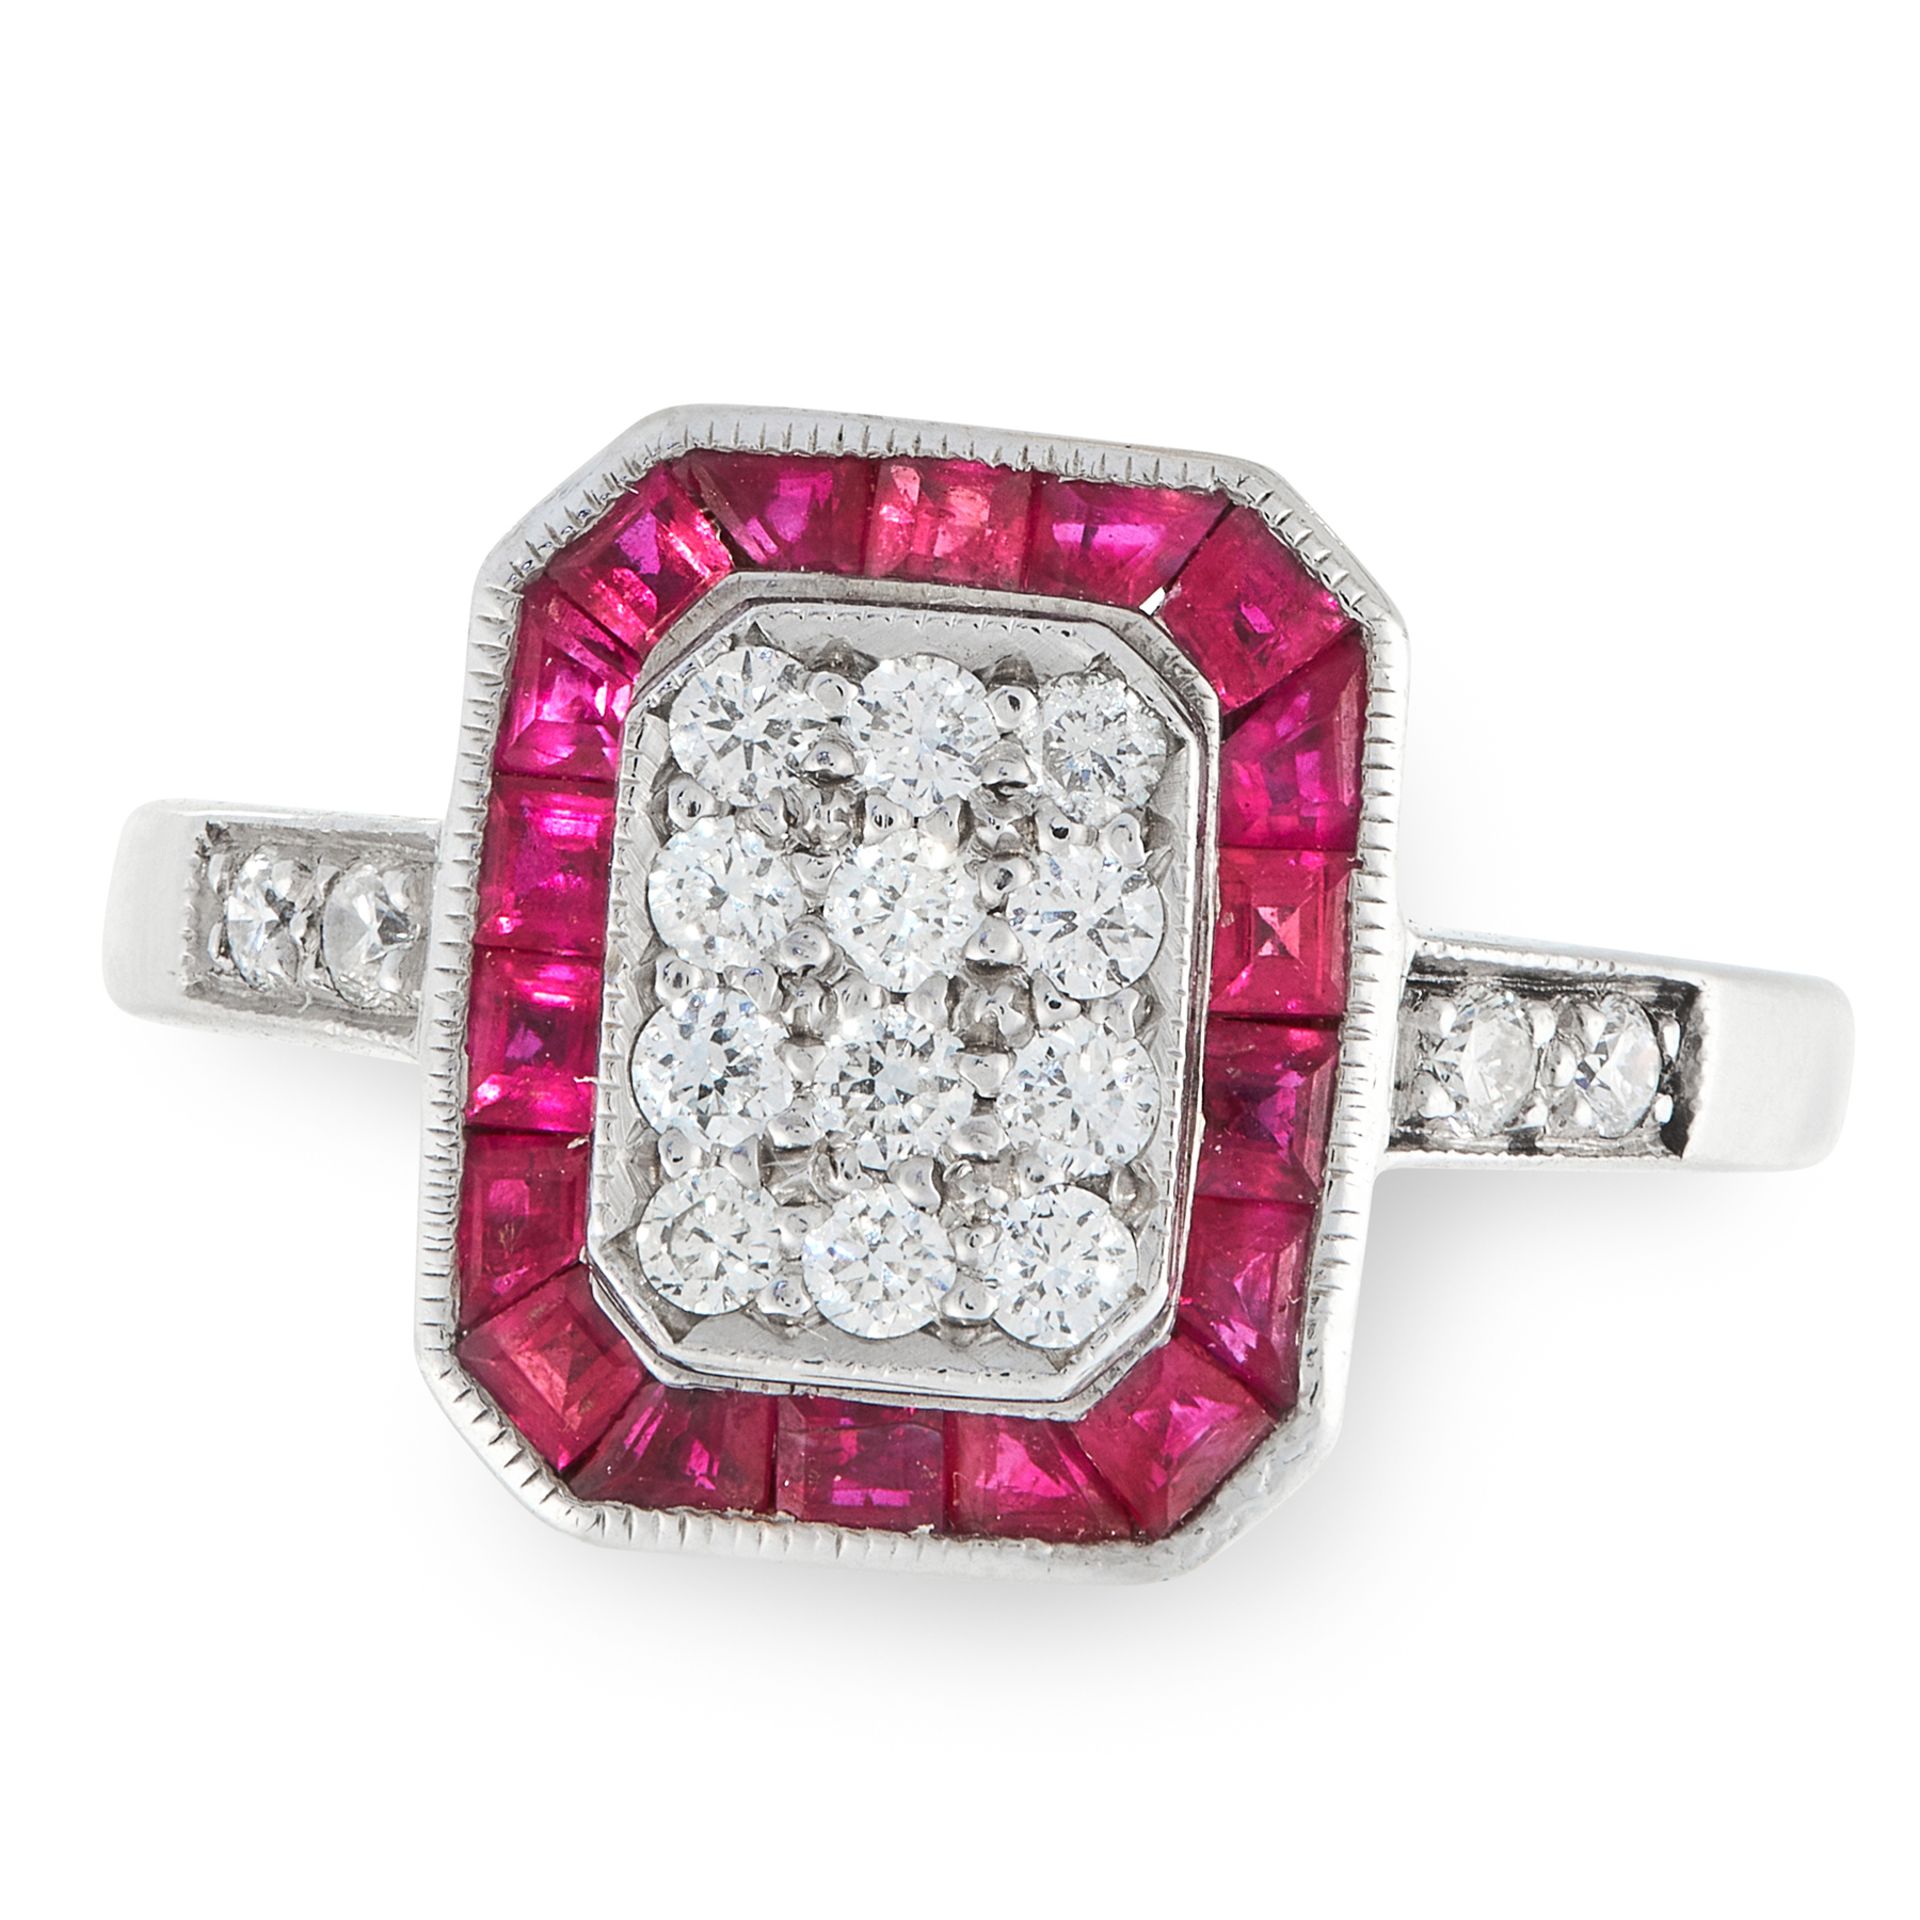 A RUBY AND DIAMOND RING in 18ct white gold, the panel face is pave set with round cut diamonds